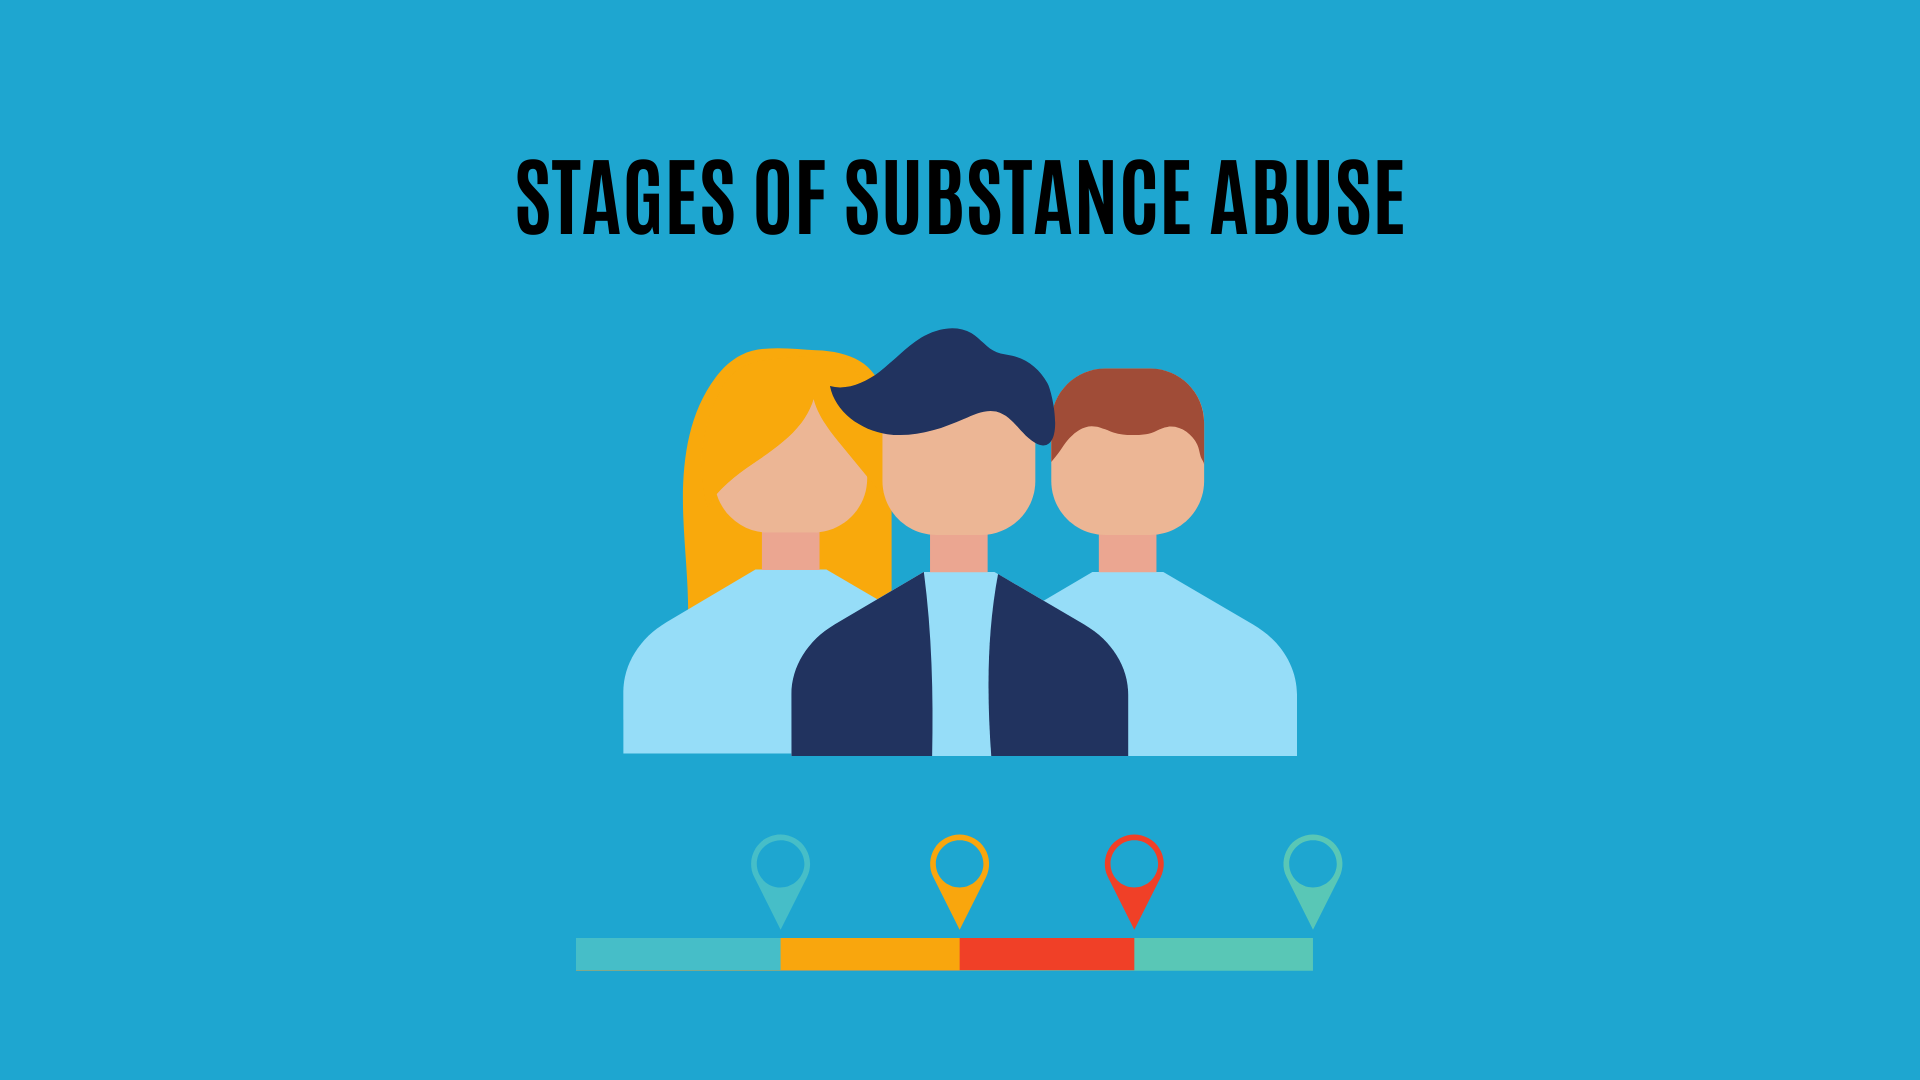 Stages of Substance Abuse